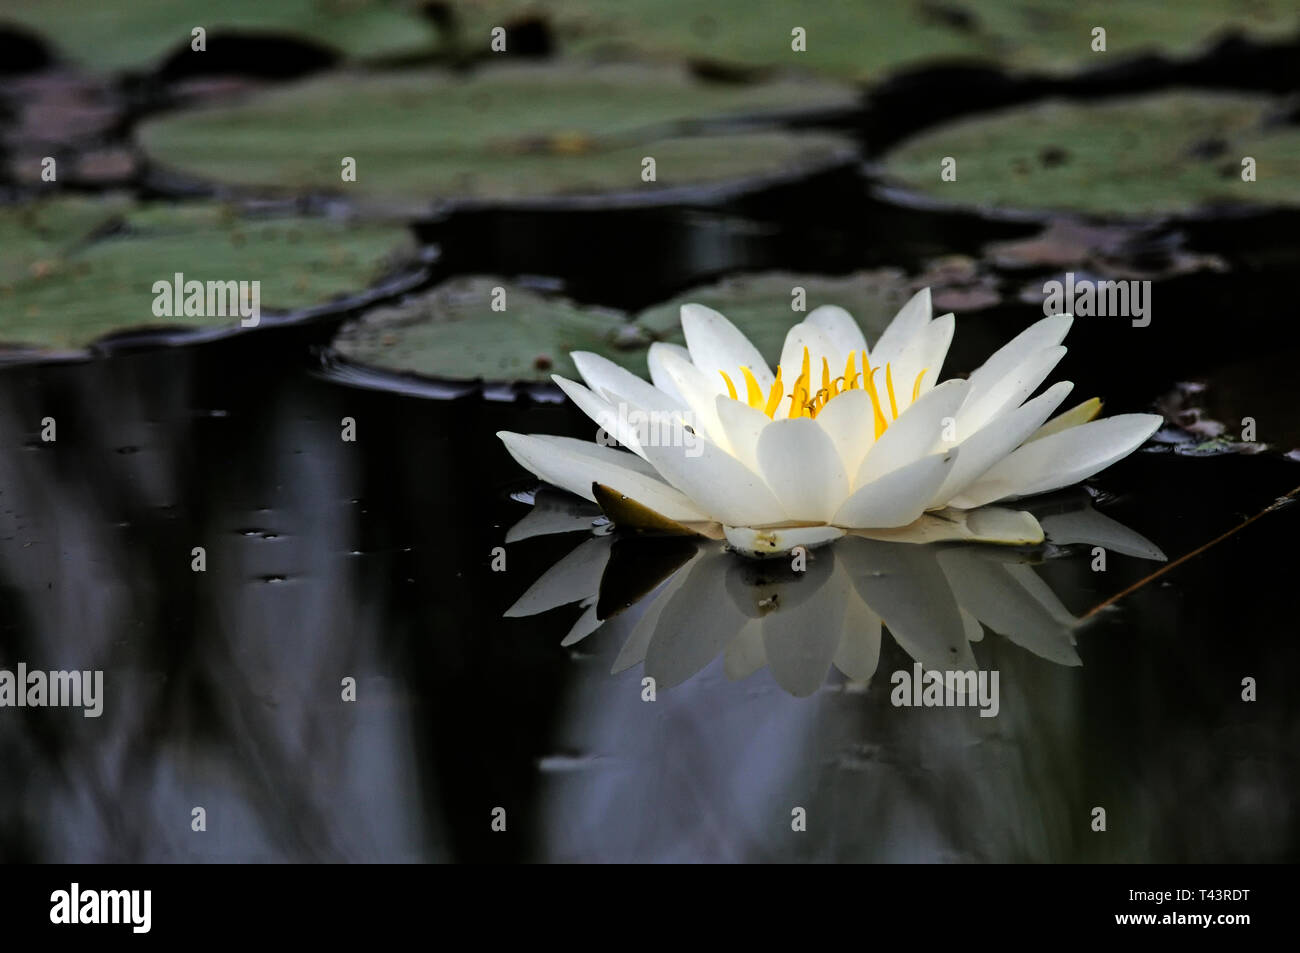 A white water - lily ( Nymphaea alba ) resting on the surface of a pond Stock Photo